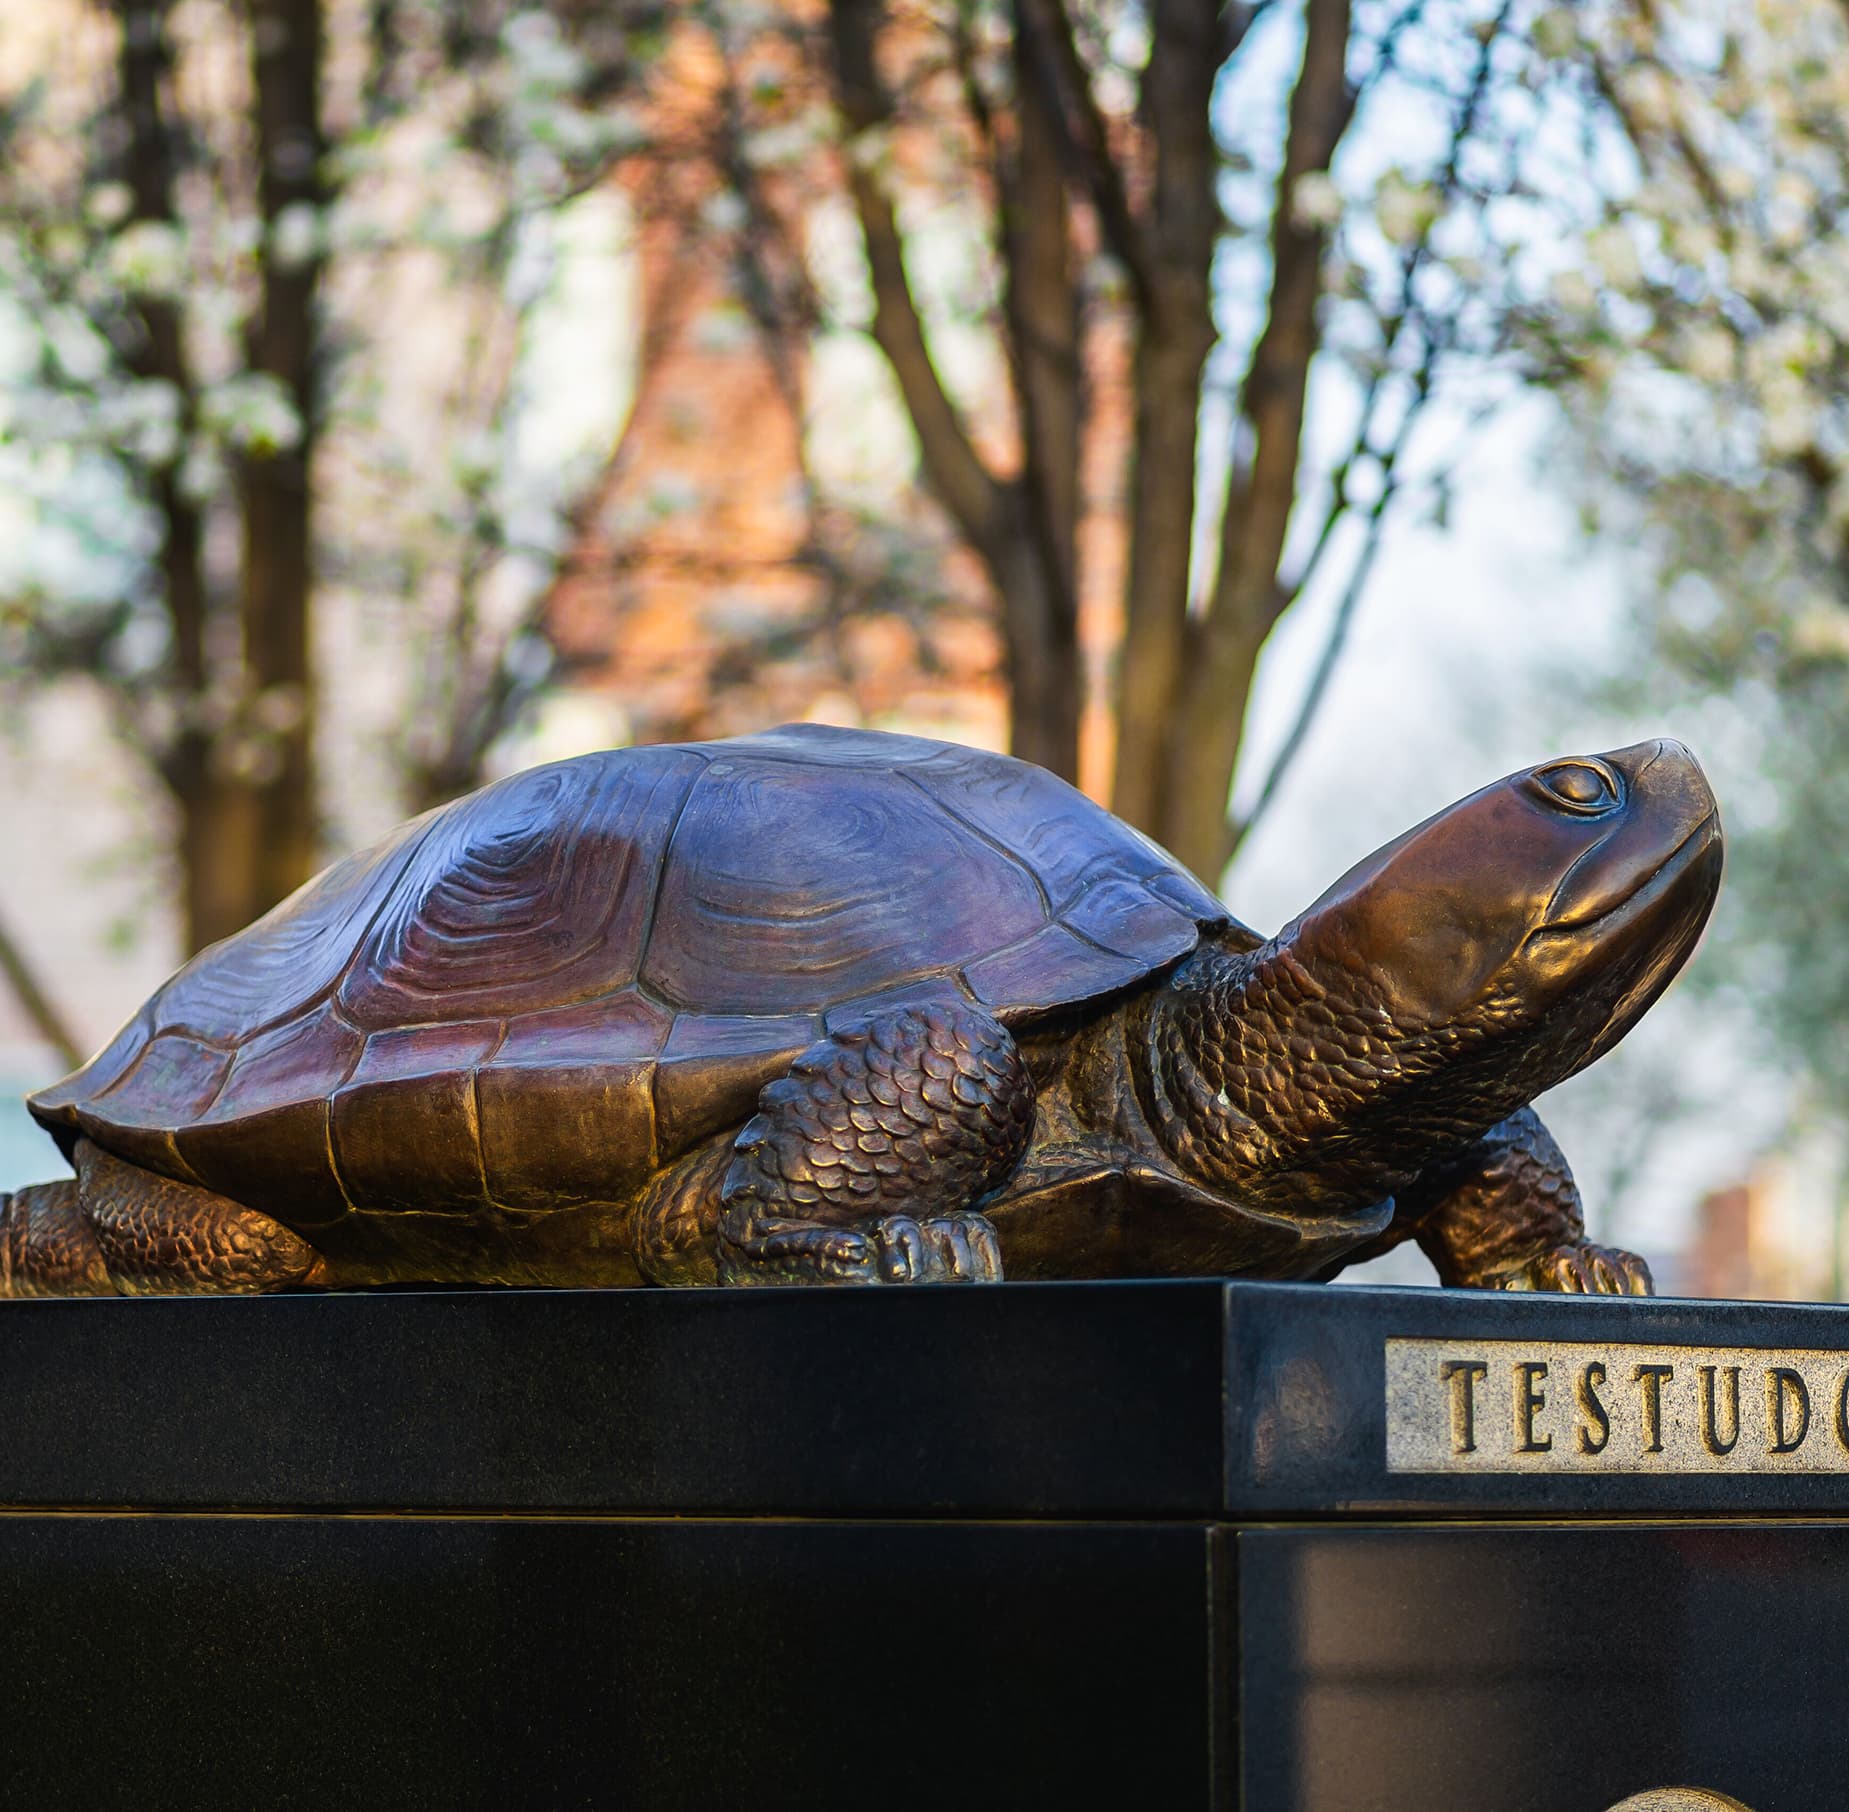 Testudo in front of Riggs